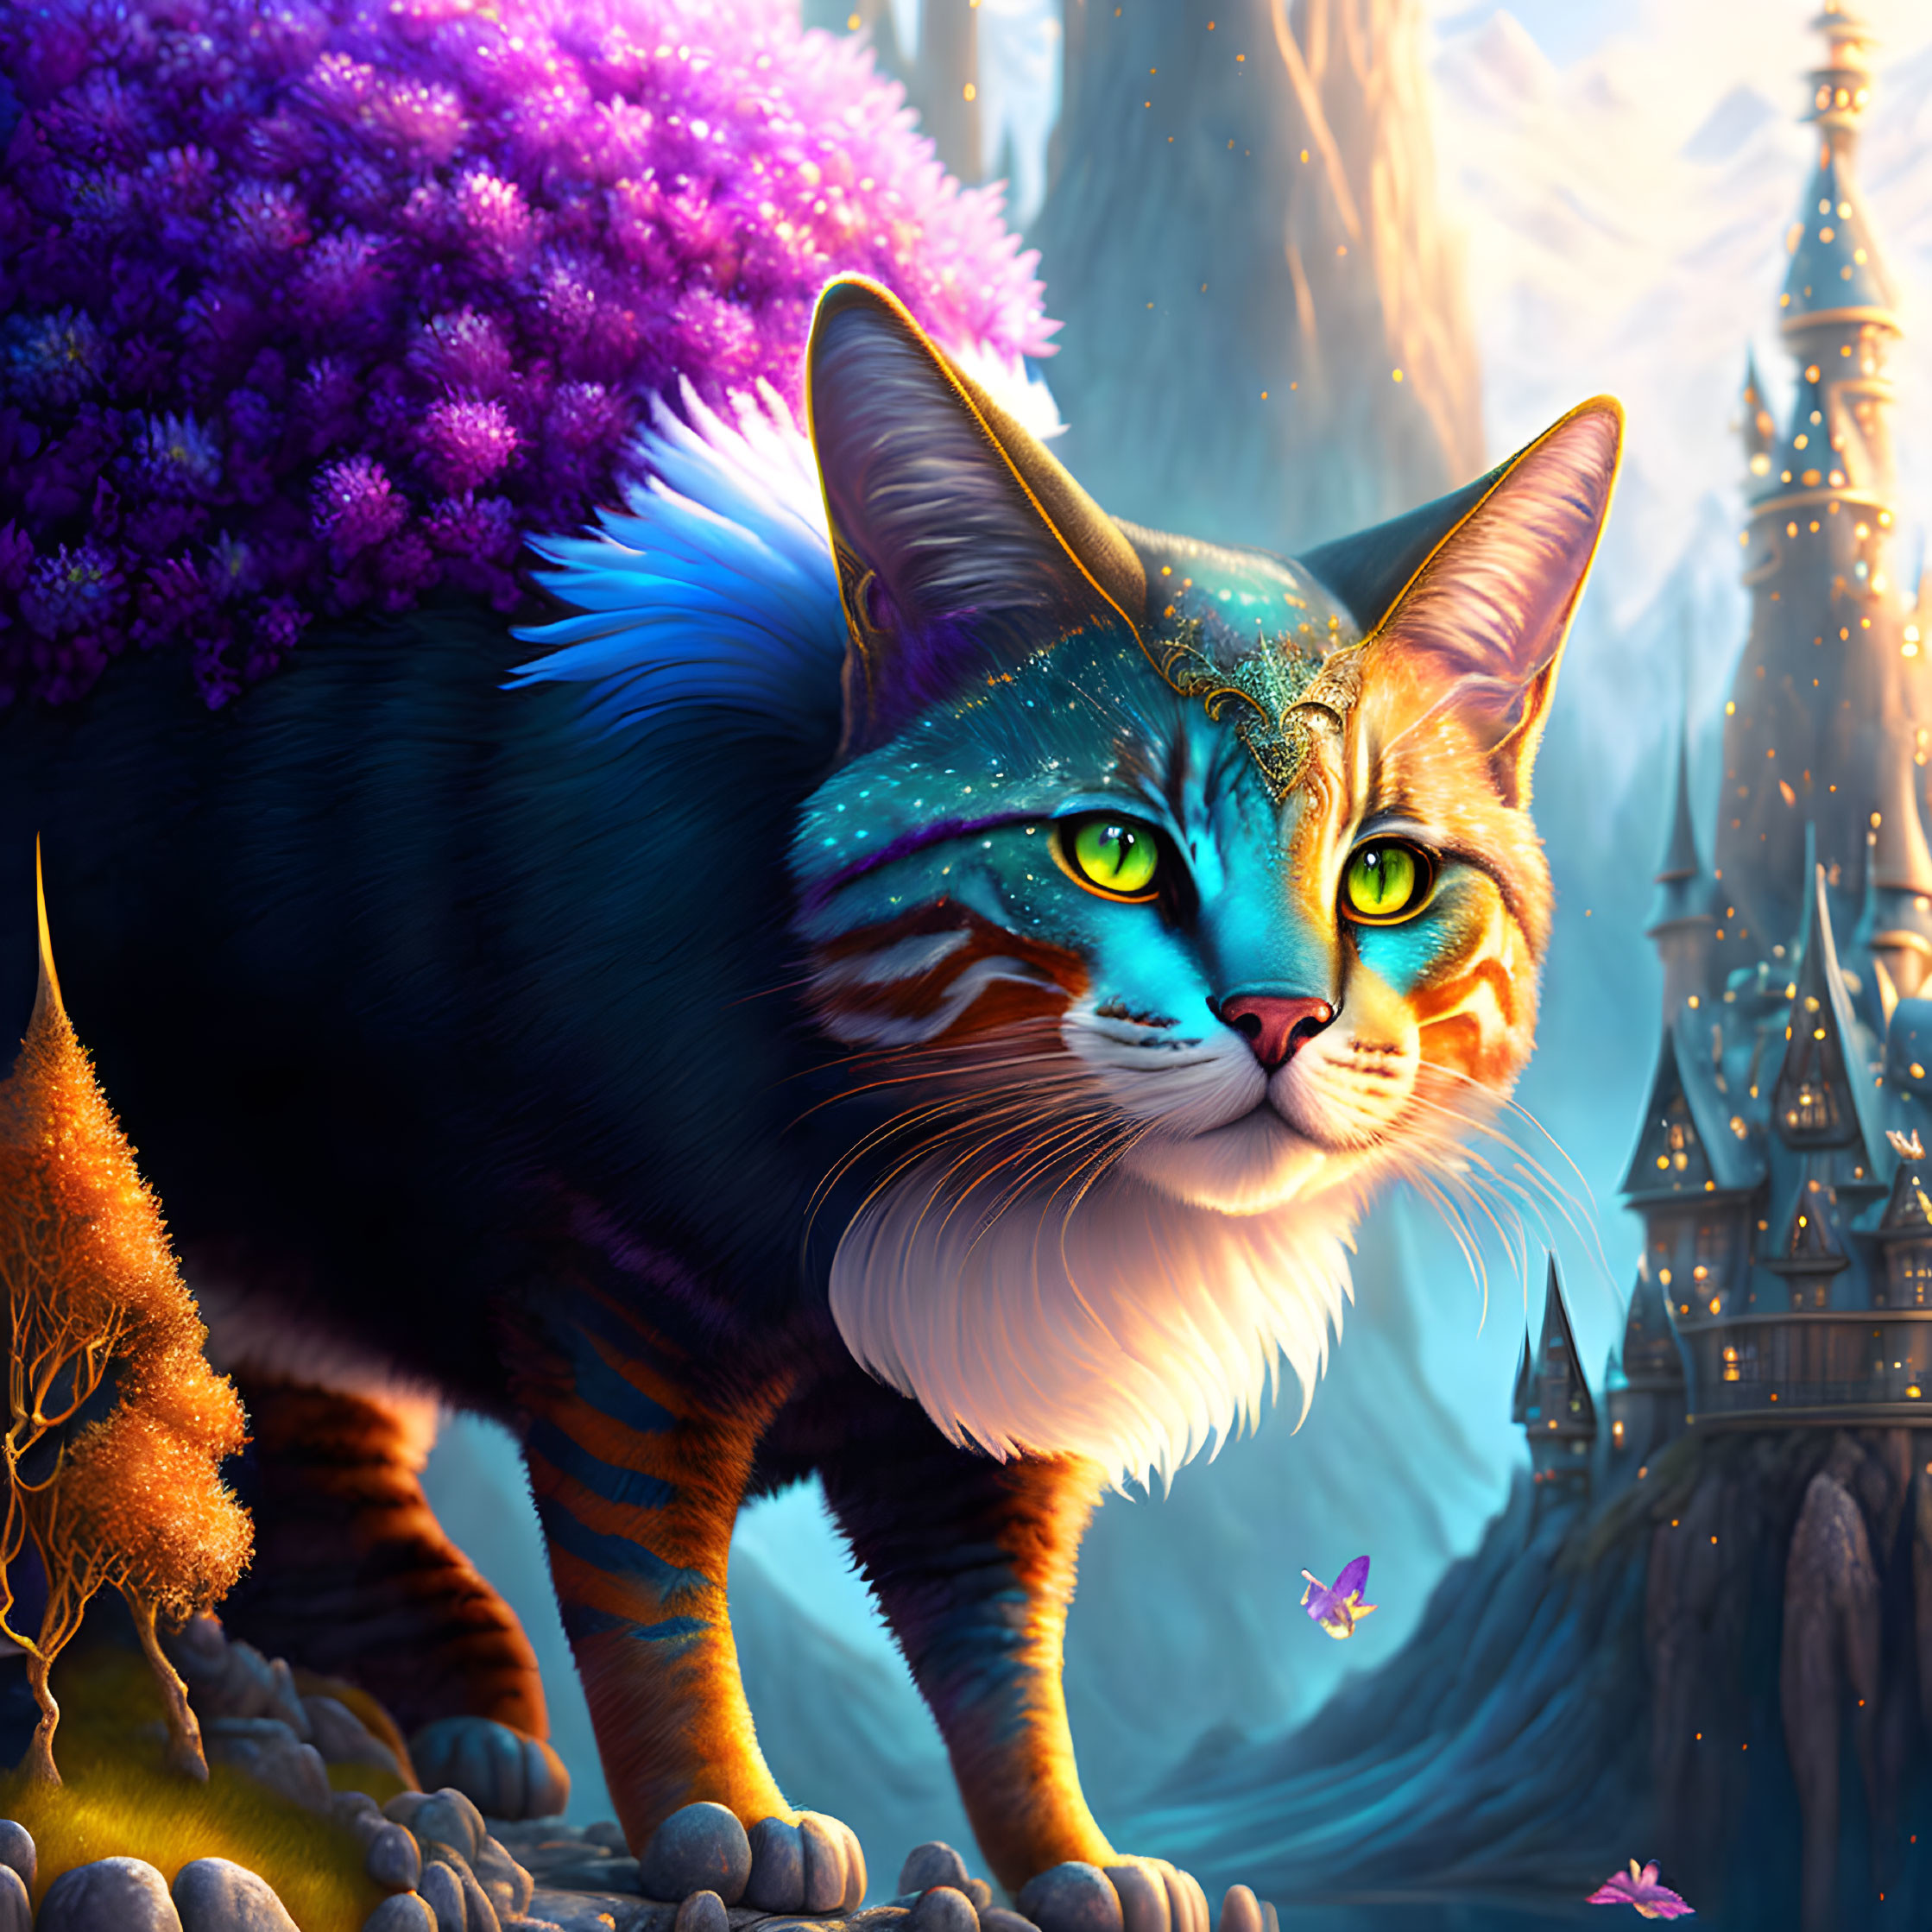 Vibrant illustration of majestic cat with fantasy castle and foliage